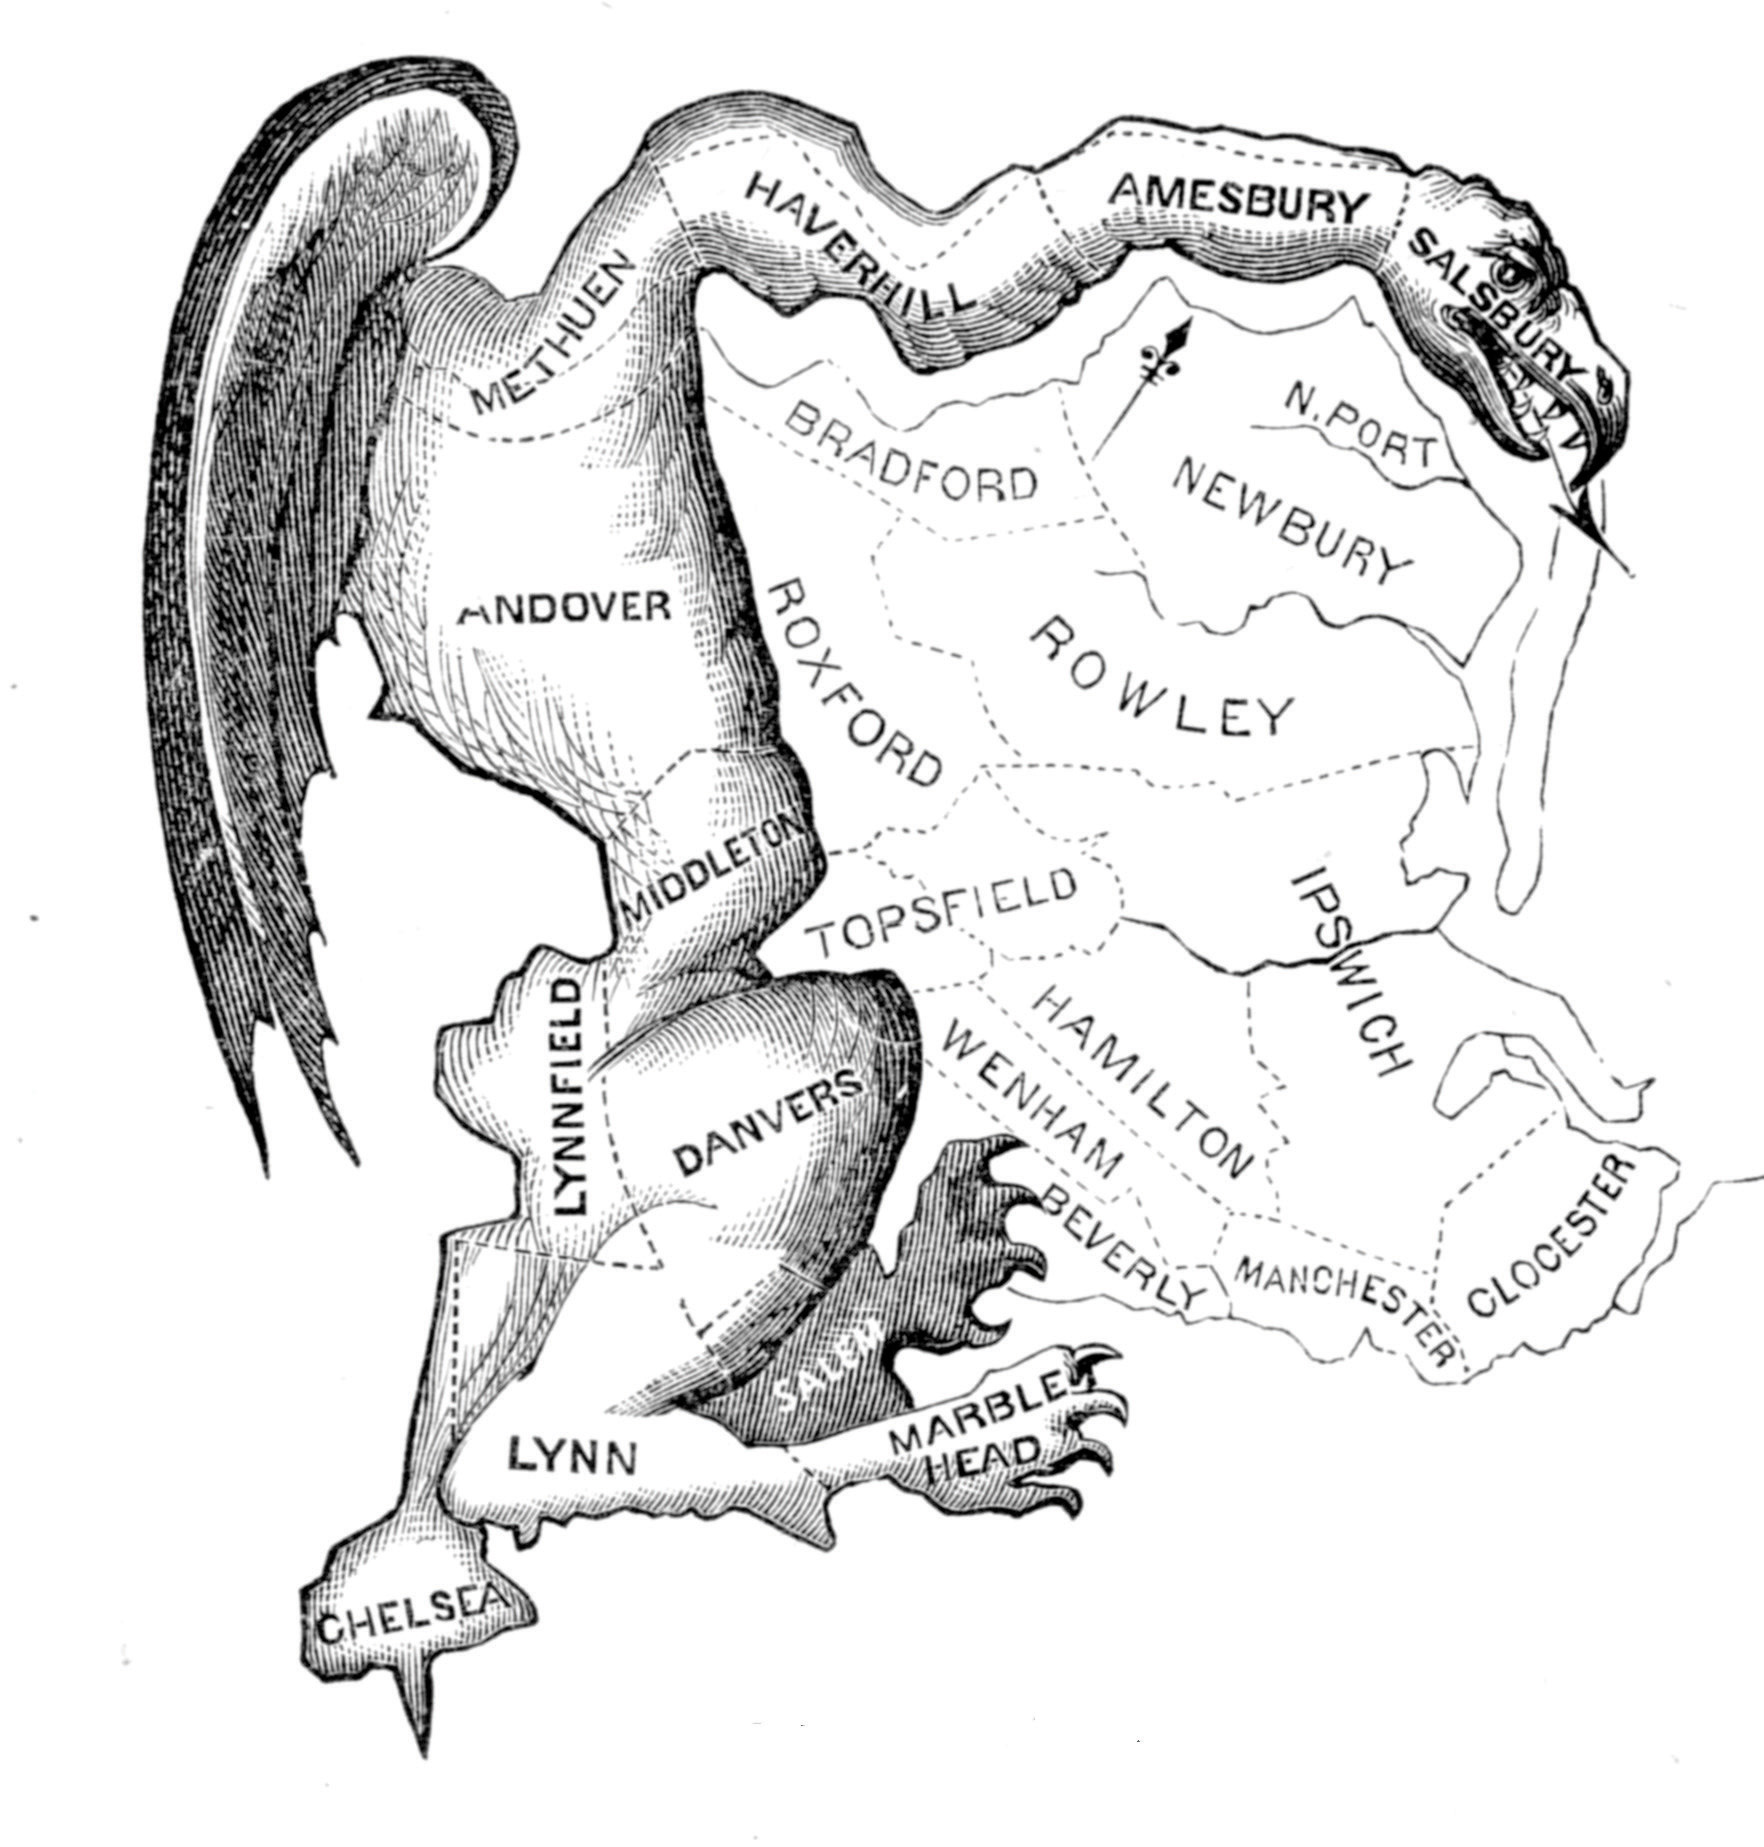 Map of electoral districts in Massachusetts in which the districts along the left and top have been shaded in and embellished to resemble a dragon or salamander (the drawing includes wings, claws, and a dragonlike face).